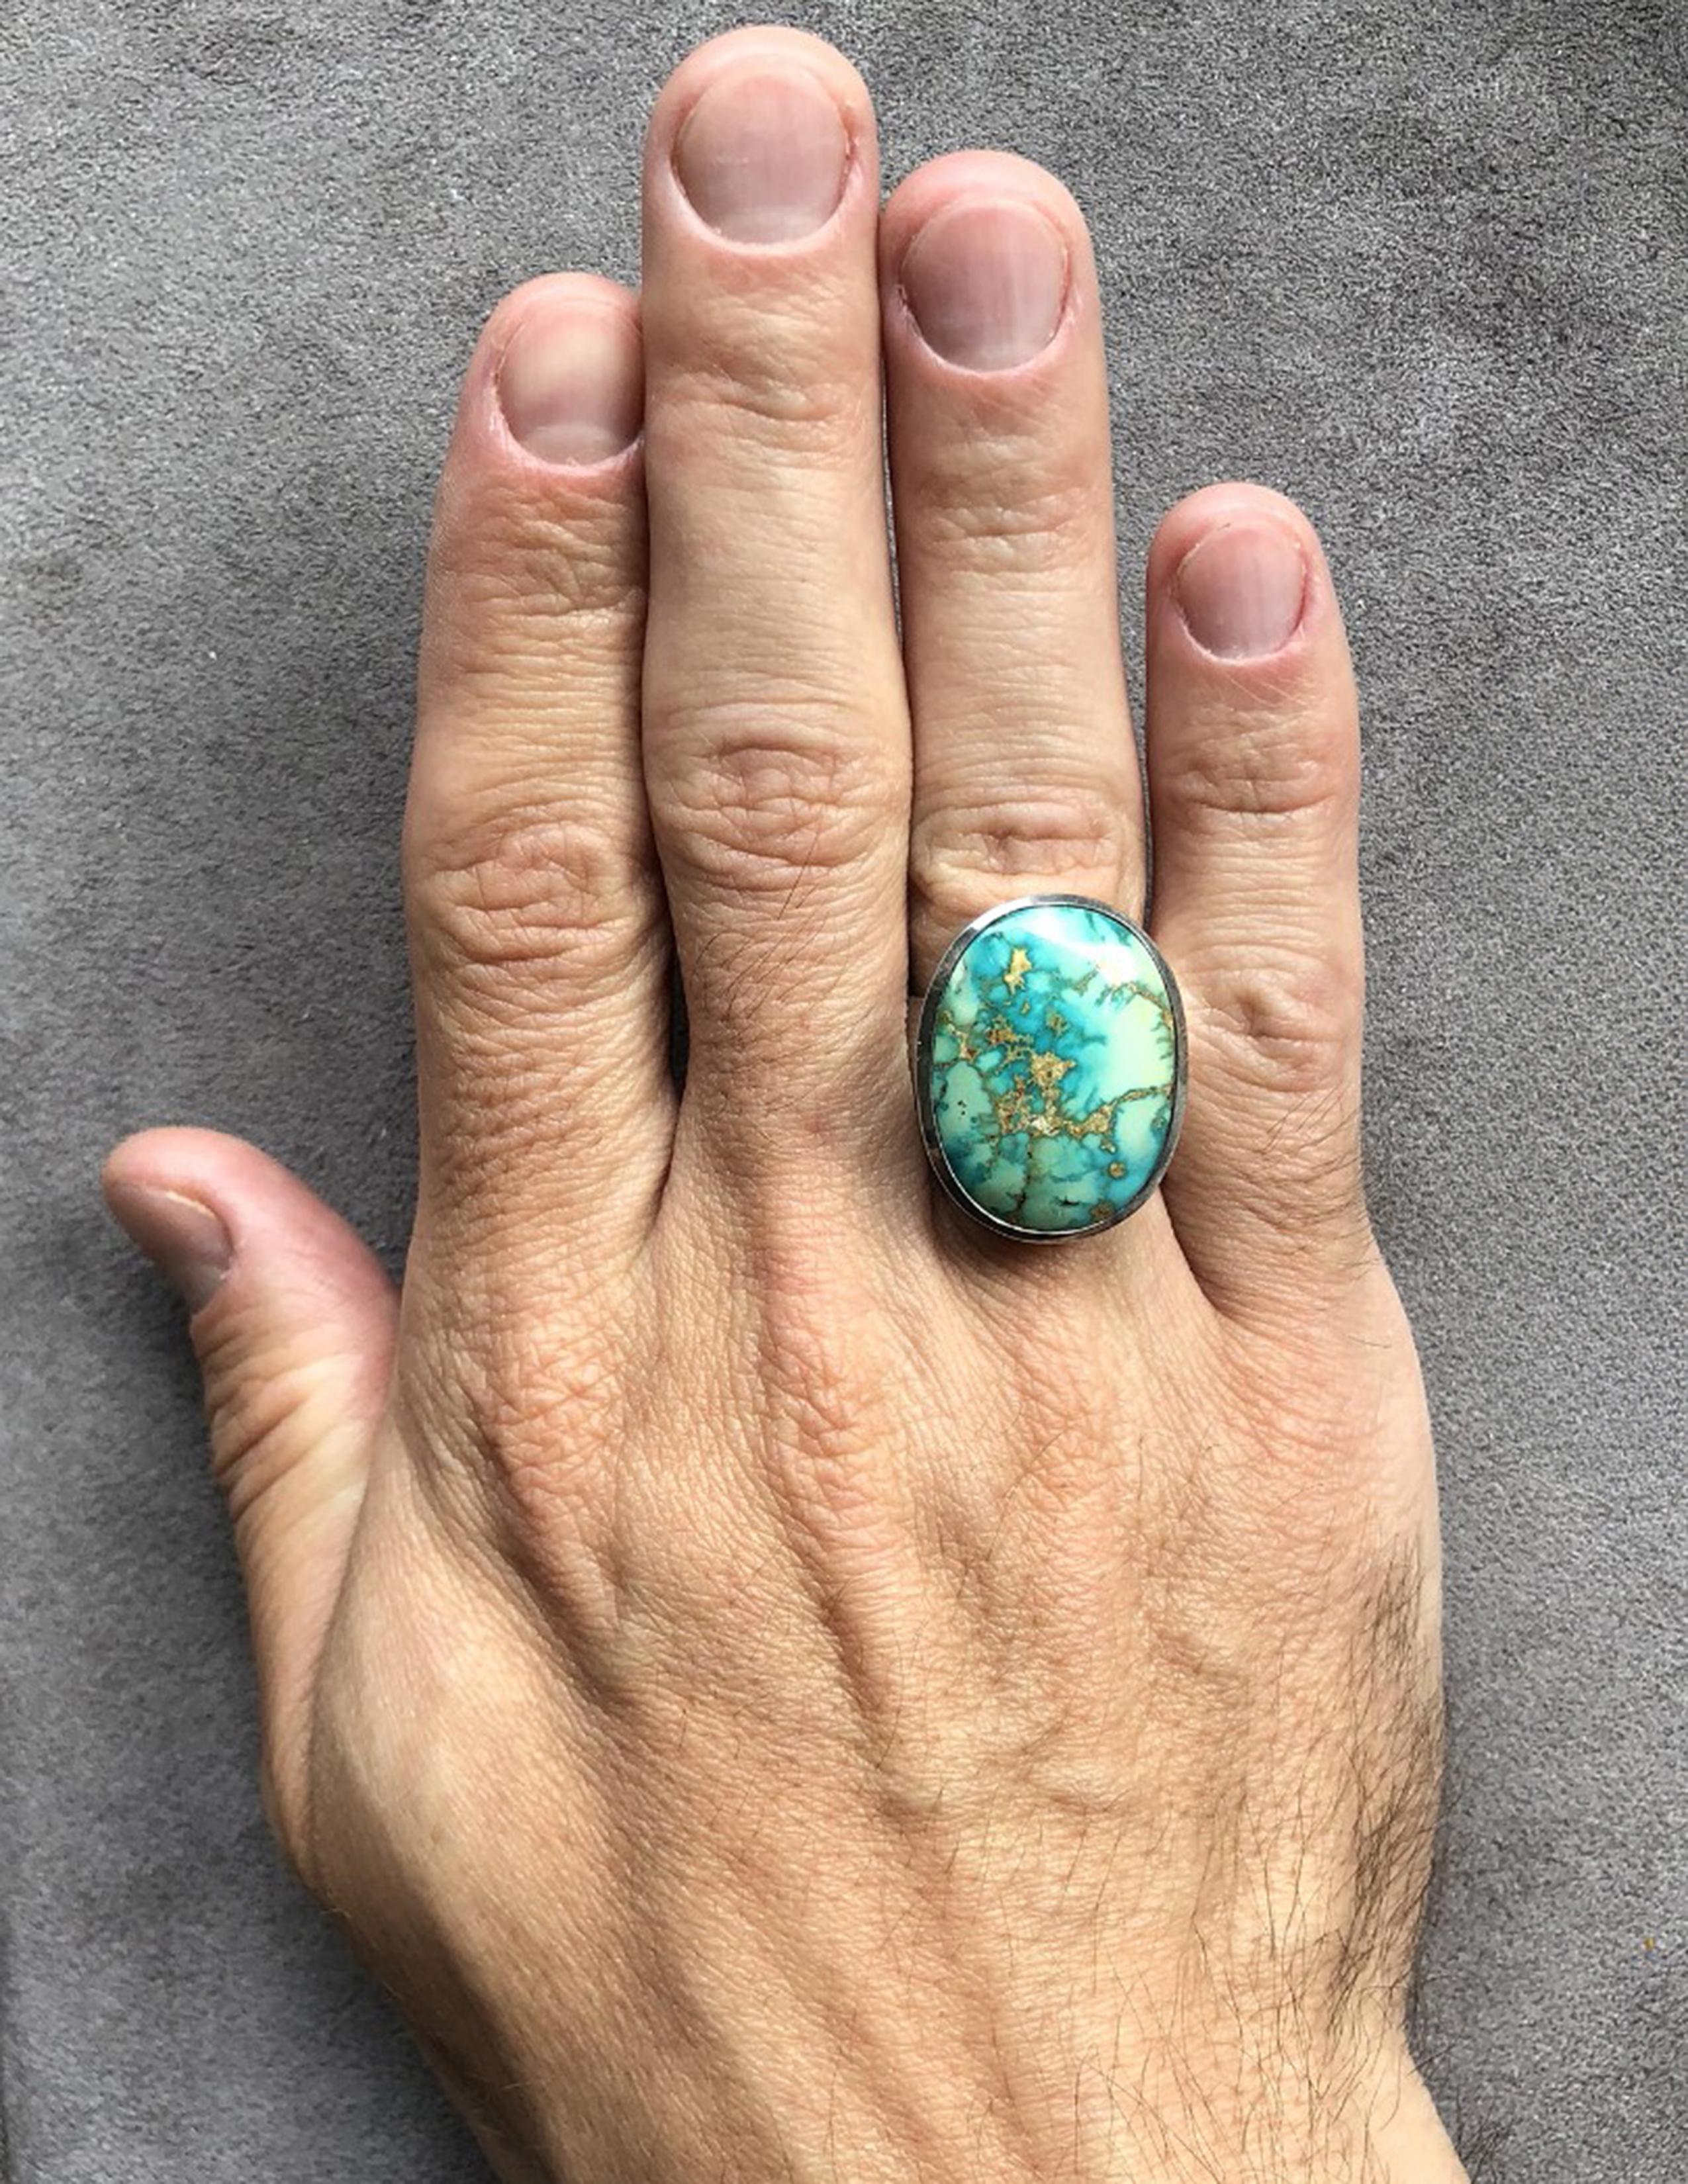 Classical Greek Large Turquoise Silver Ring Polychrome Seaweed Seafoam Green Color Natural Gem For Sale